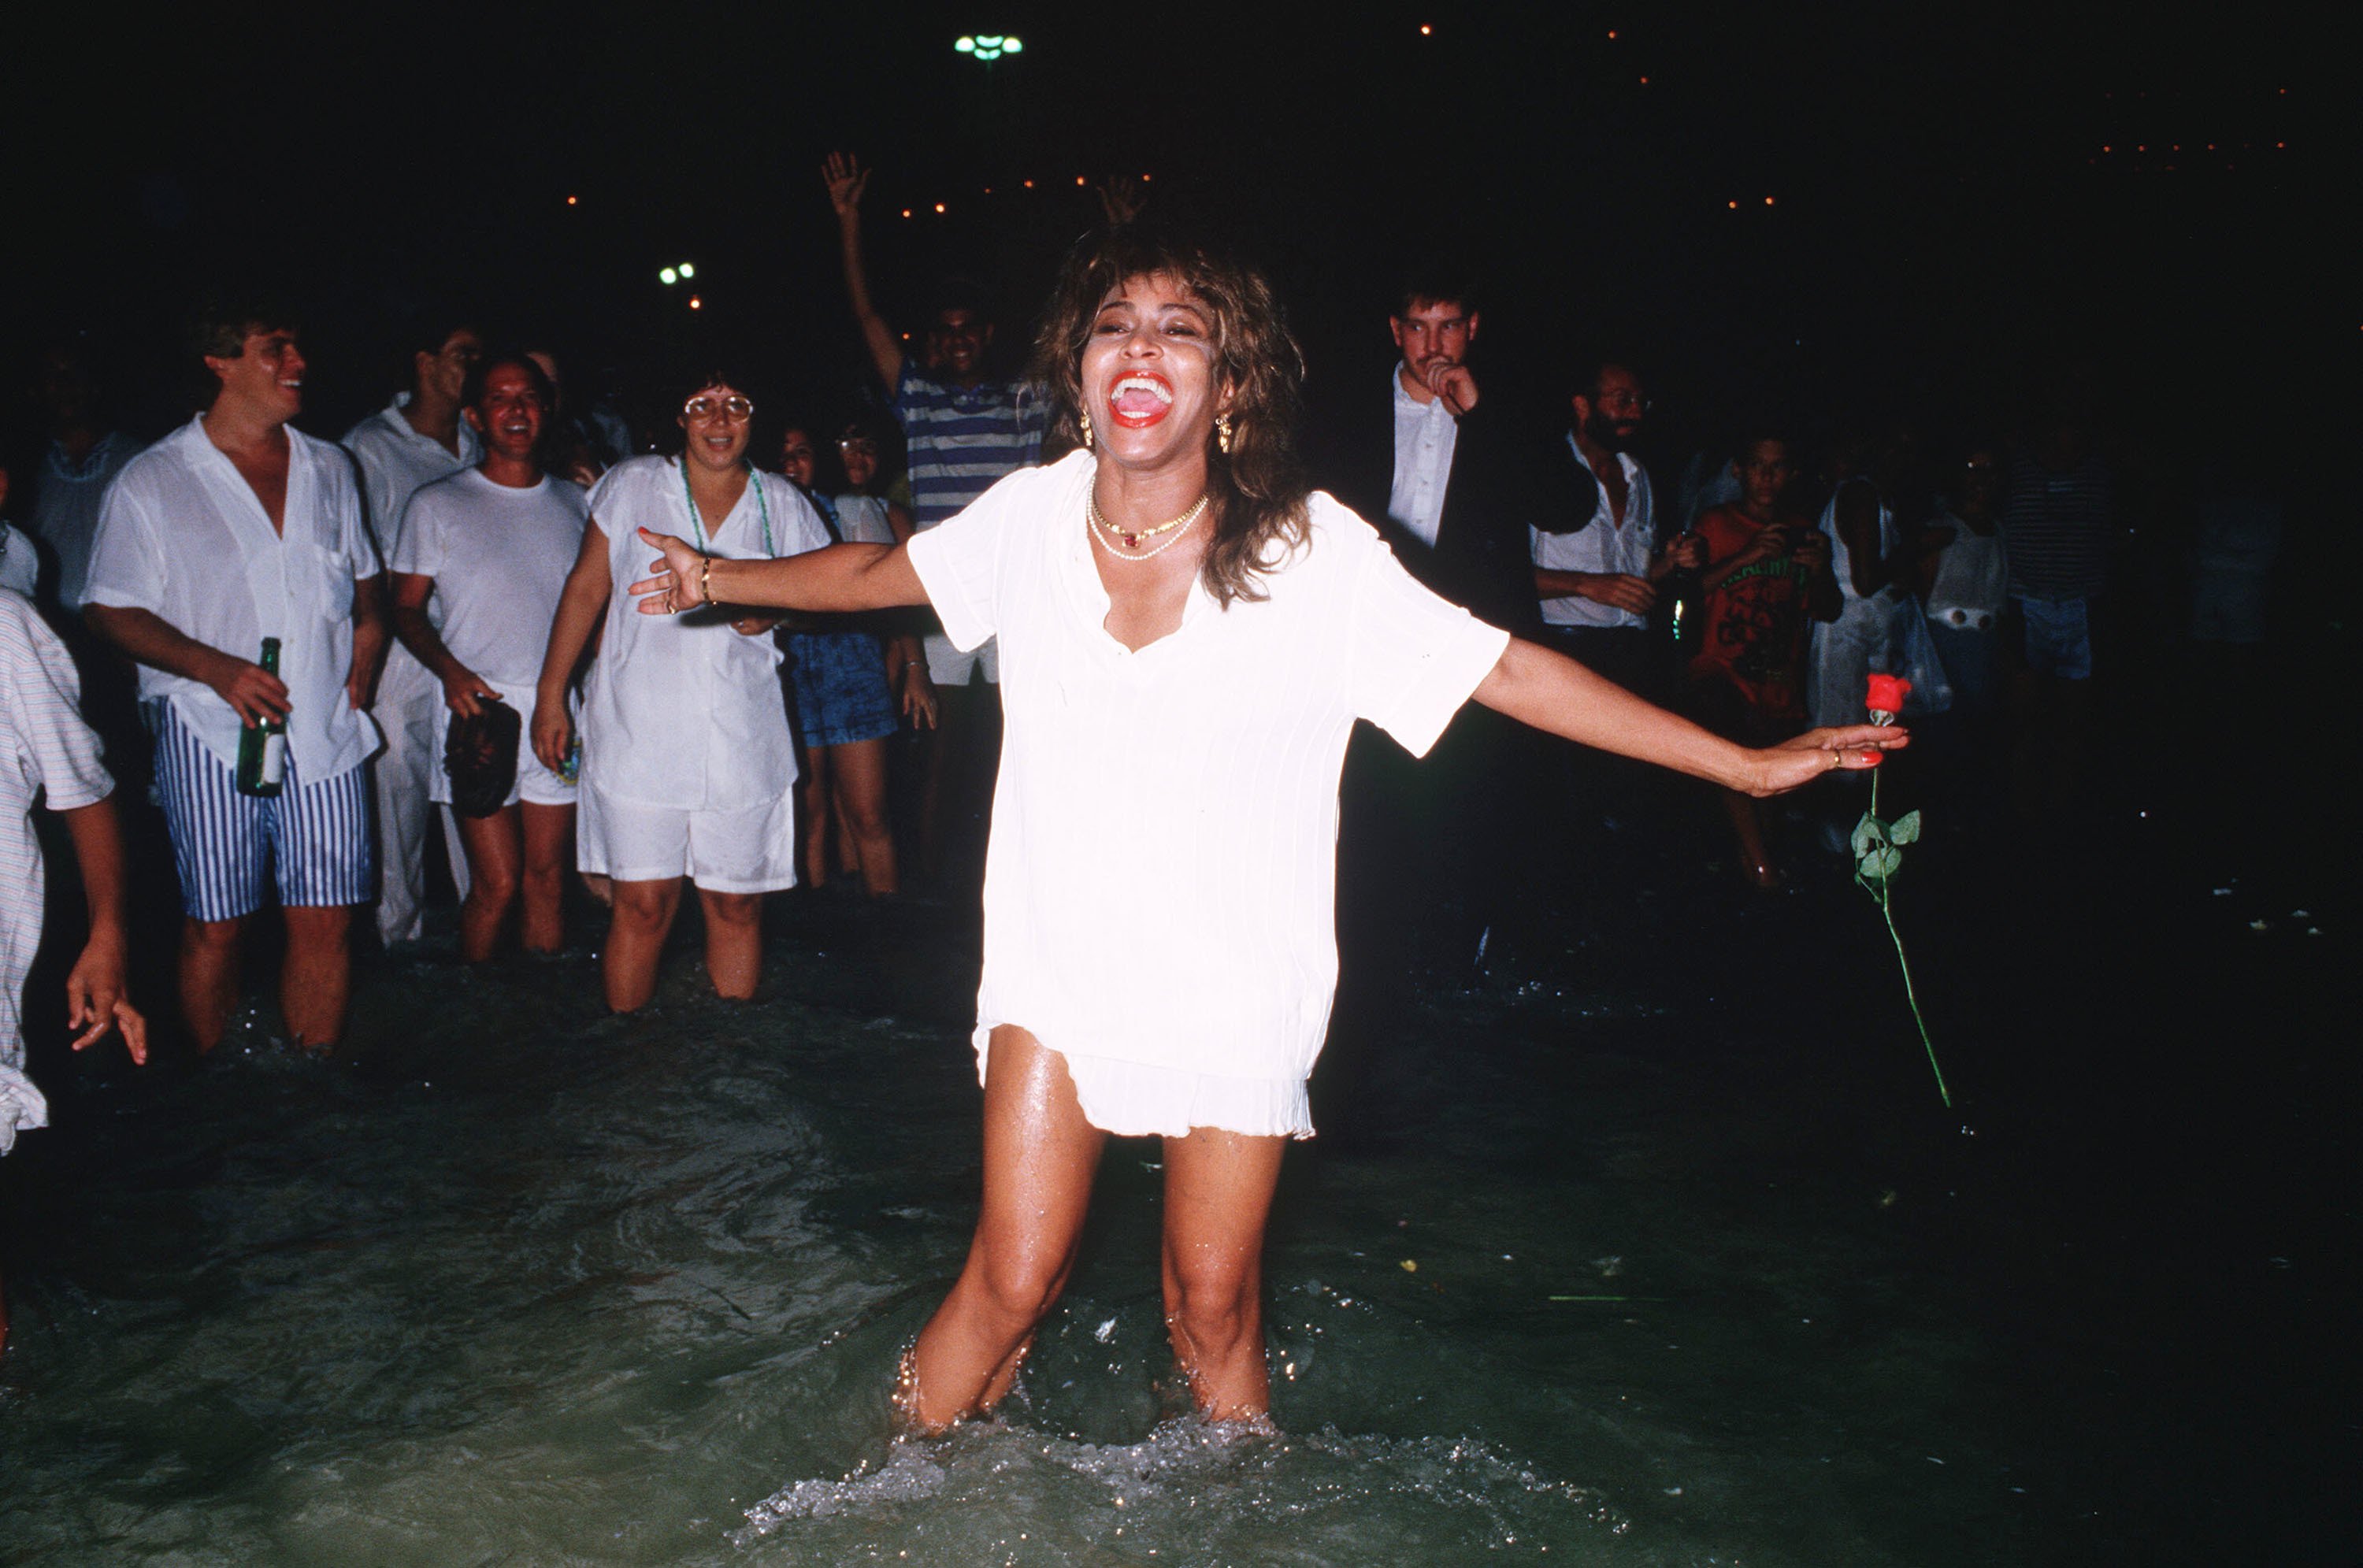  Tina Turner in the sea on New Years Eve in Rio de Janeiro, Brazil in 1988 | Source: Getty Images